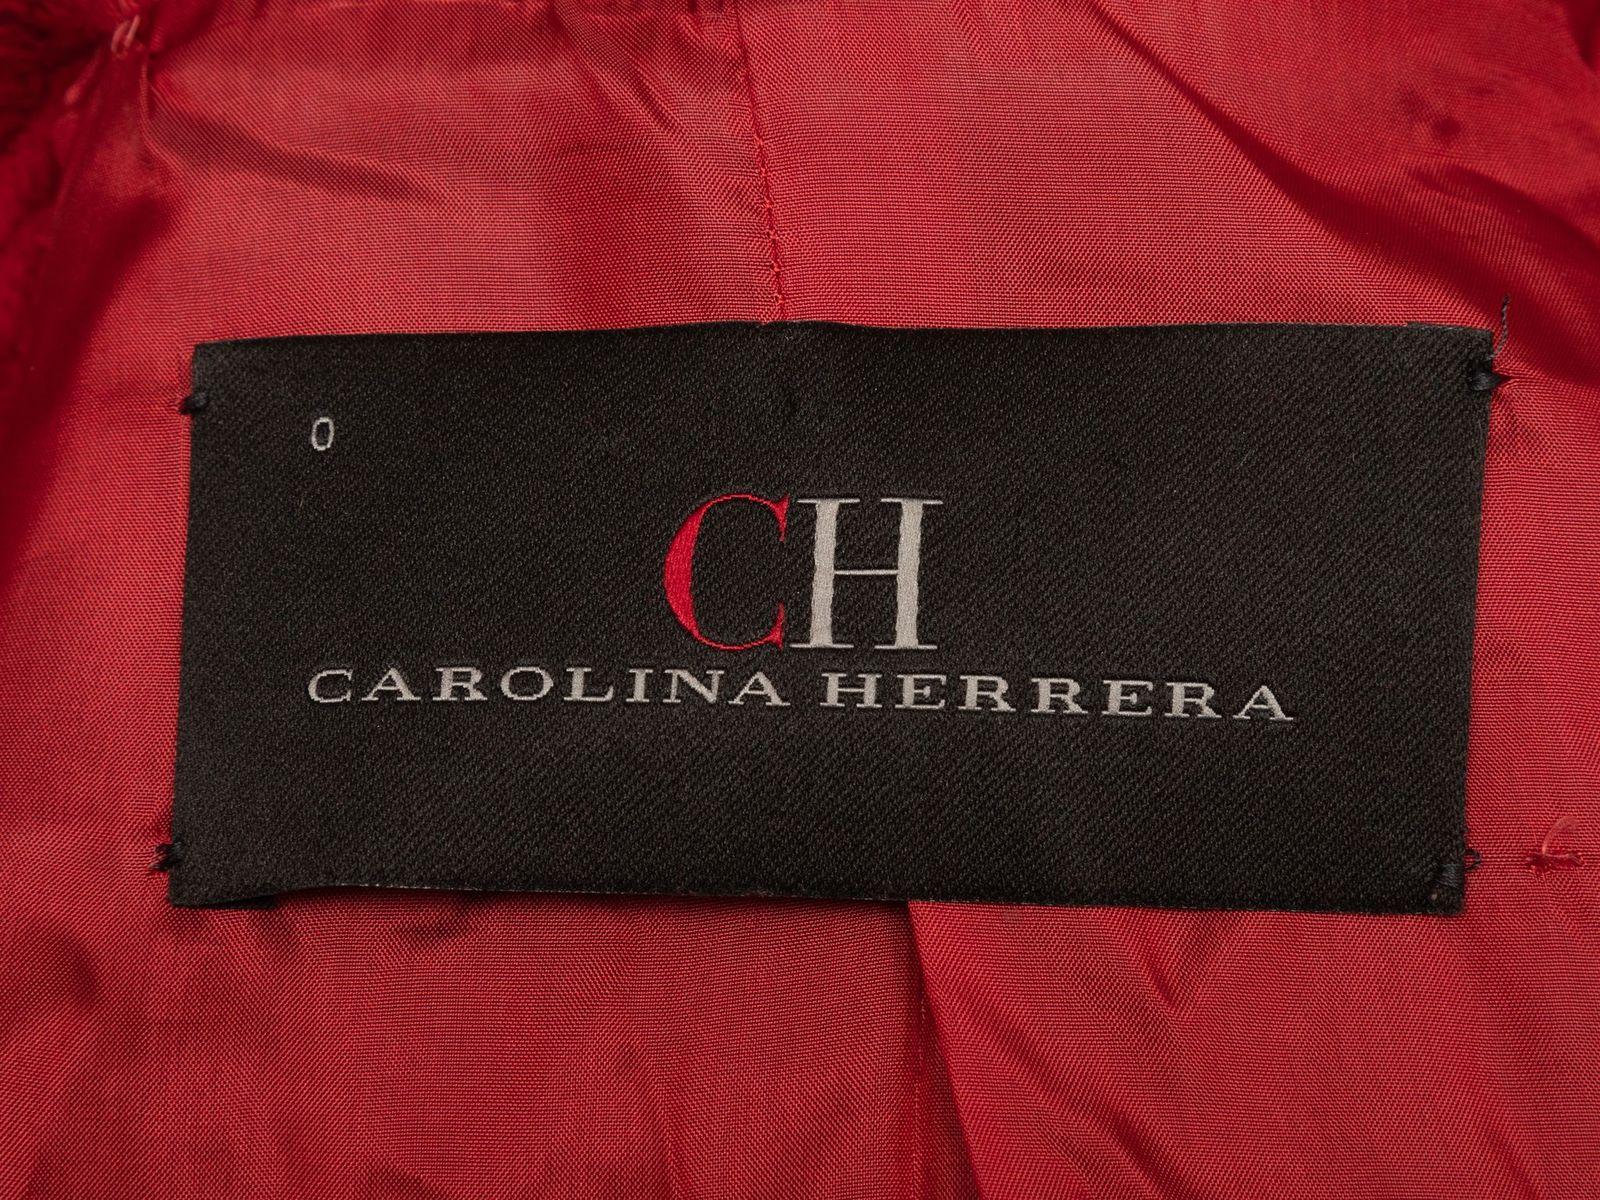 Product Details: Red wool textured double-breasted coat by Carolina Herrera. Pointed collar. Button closures at front. 31